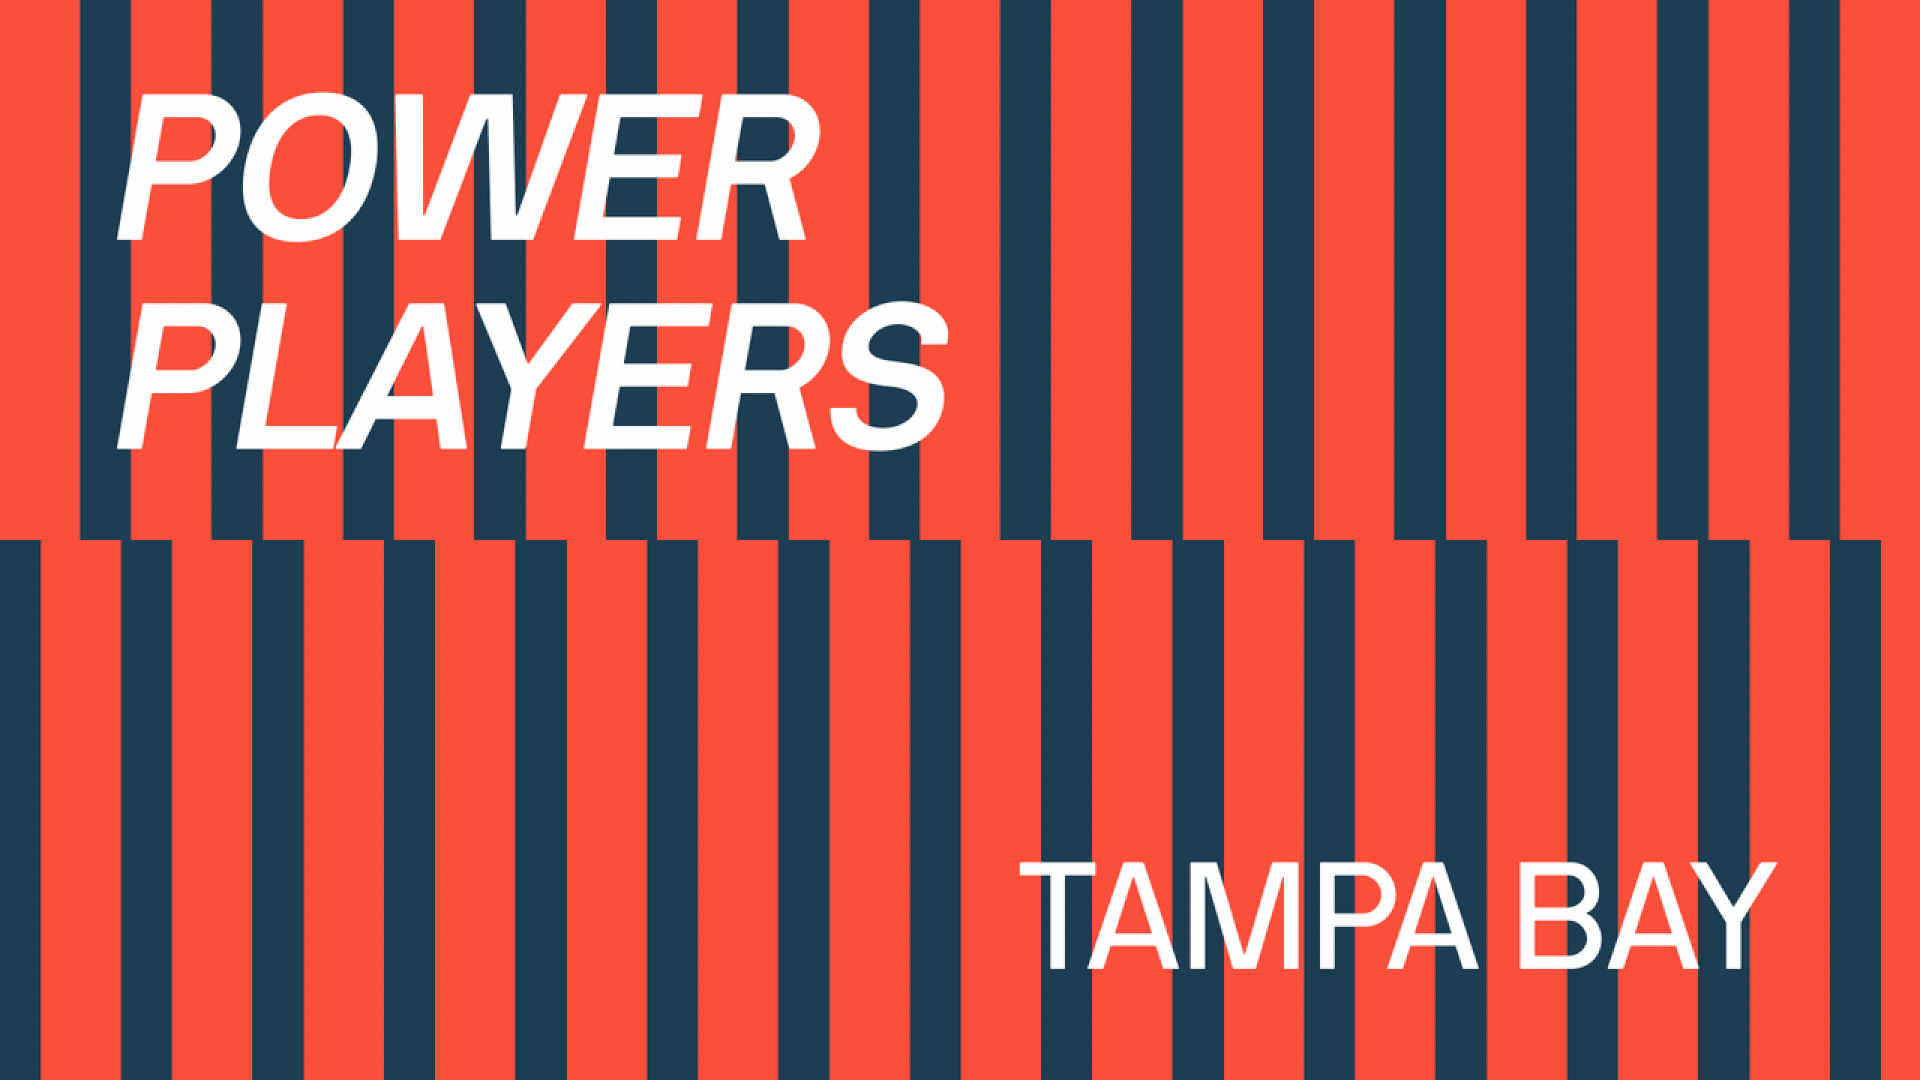 Illustration of two rows of dominos falling with text overlaid that reads Power Players Tampa Bay.